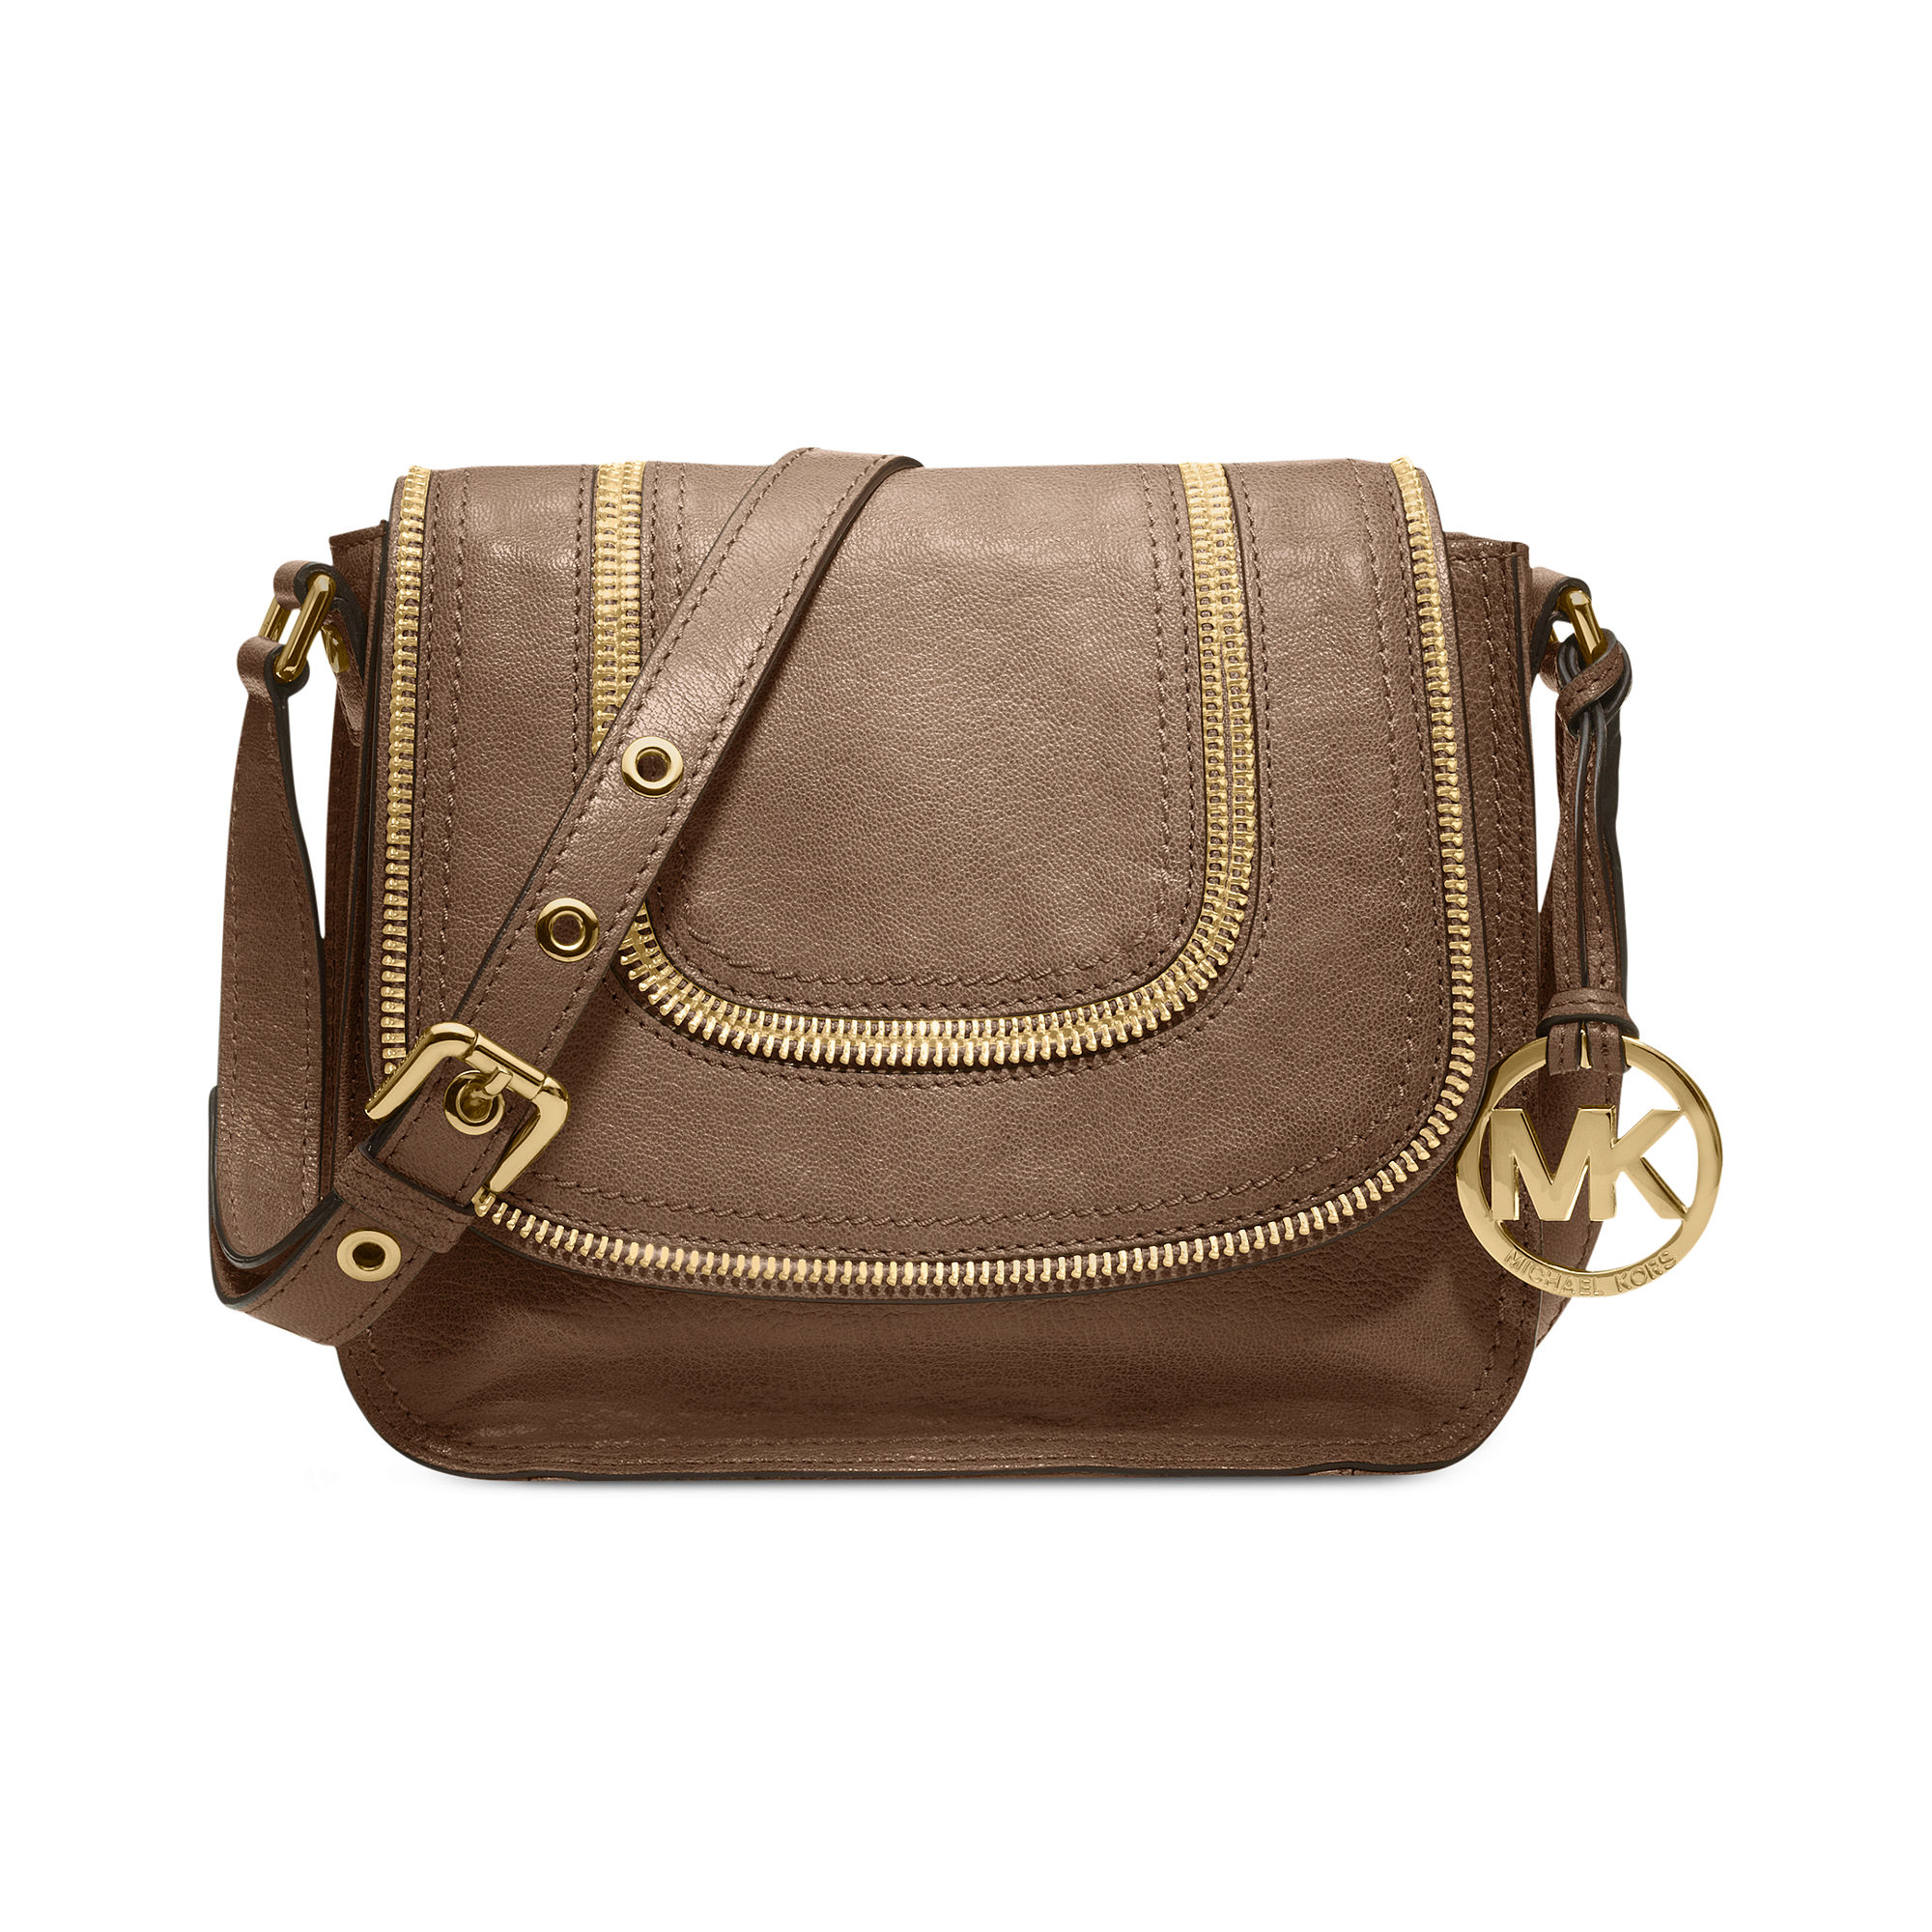 Michael Kors Bayview Small Messenger Bag in Brown - Lyst